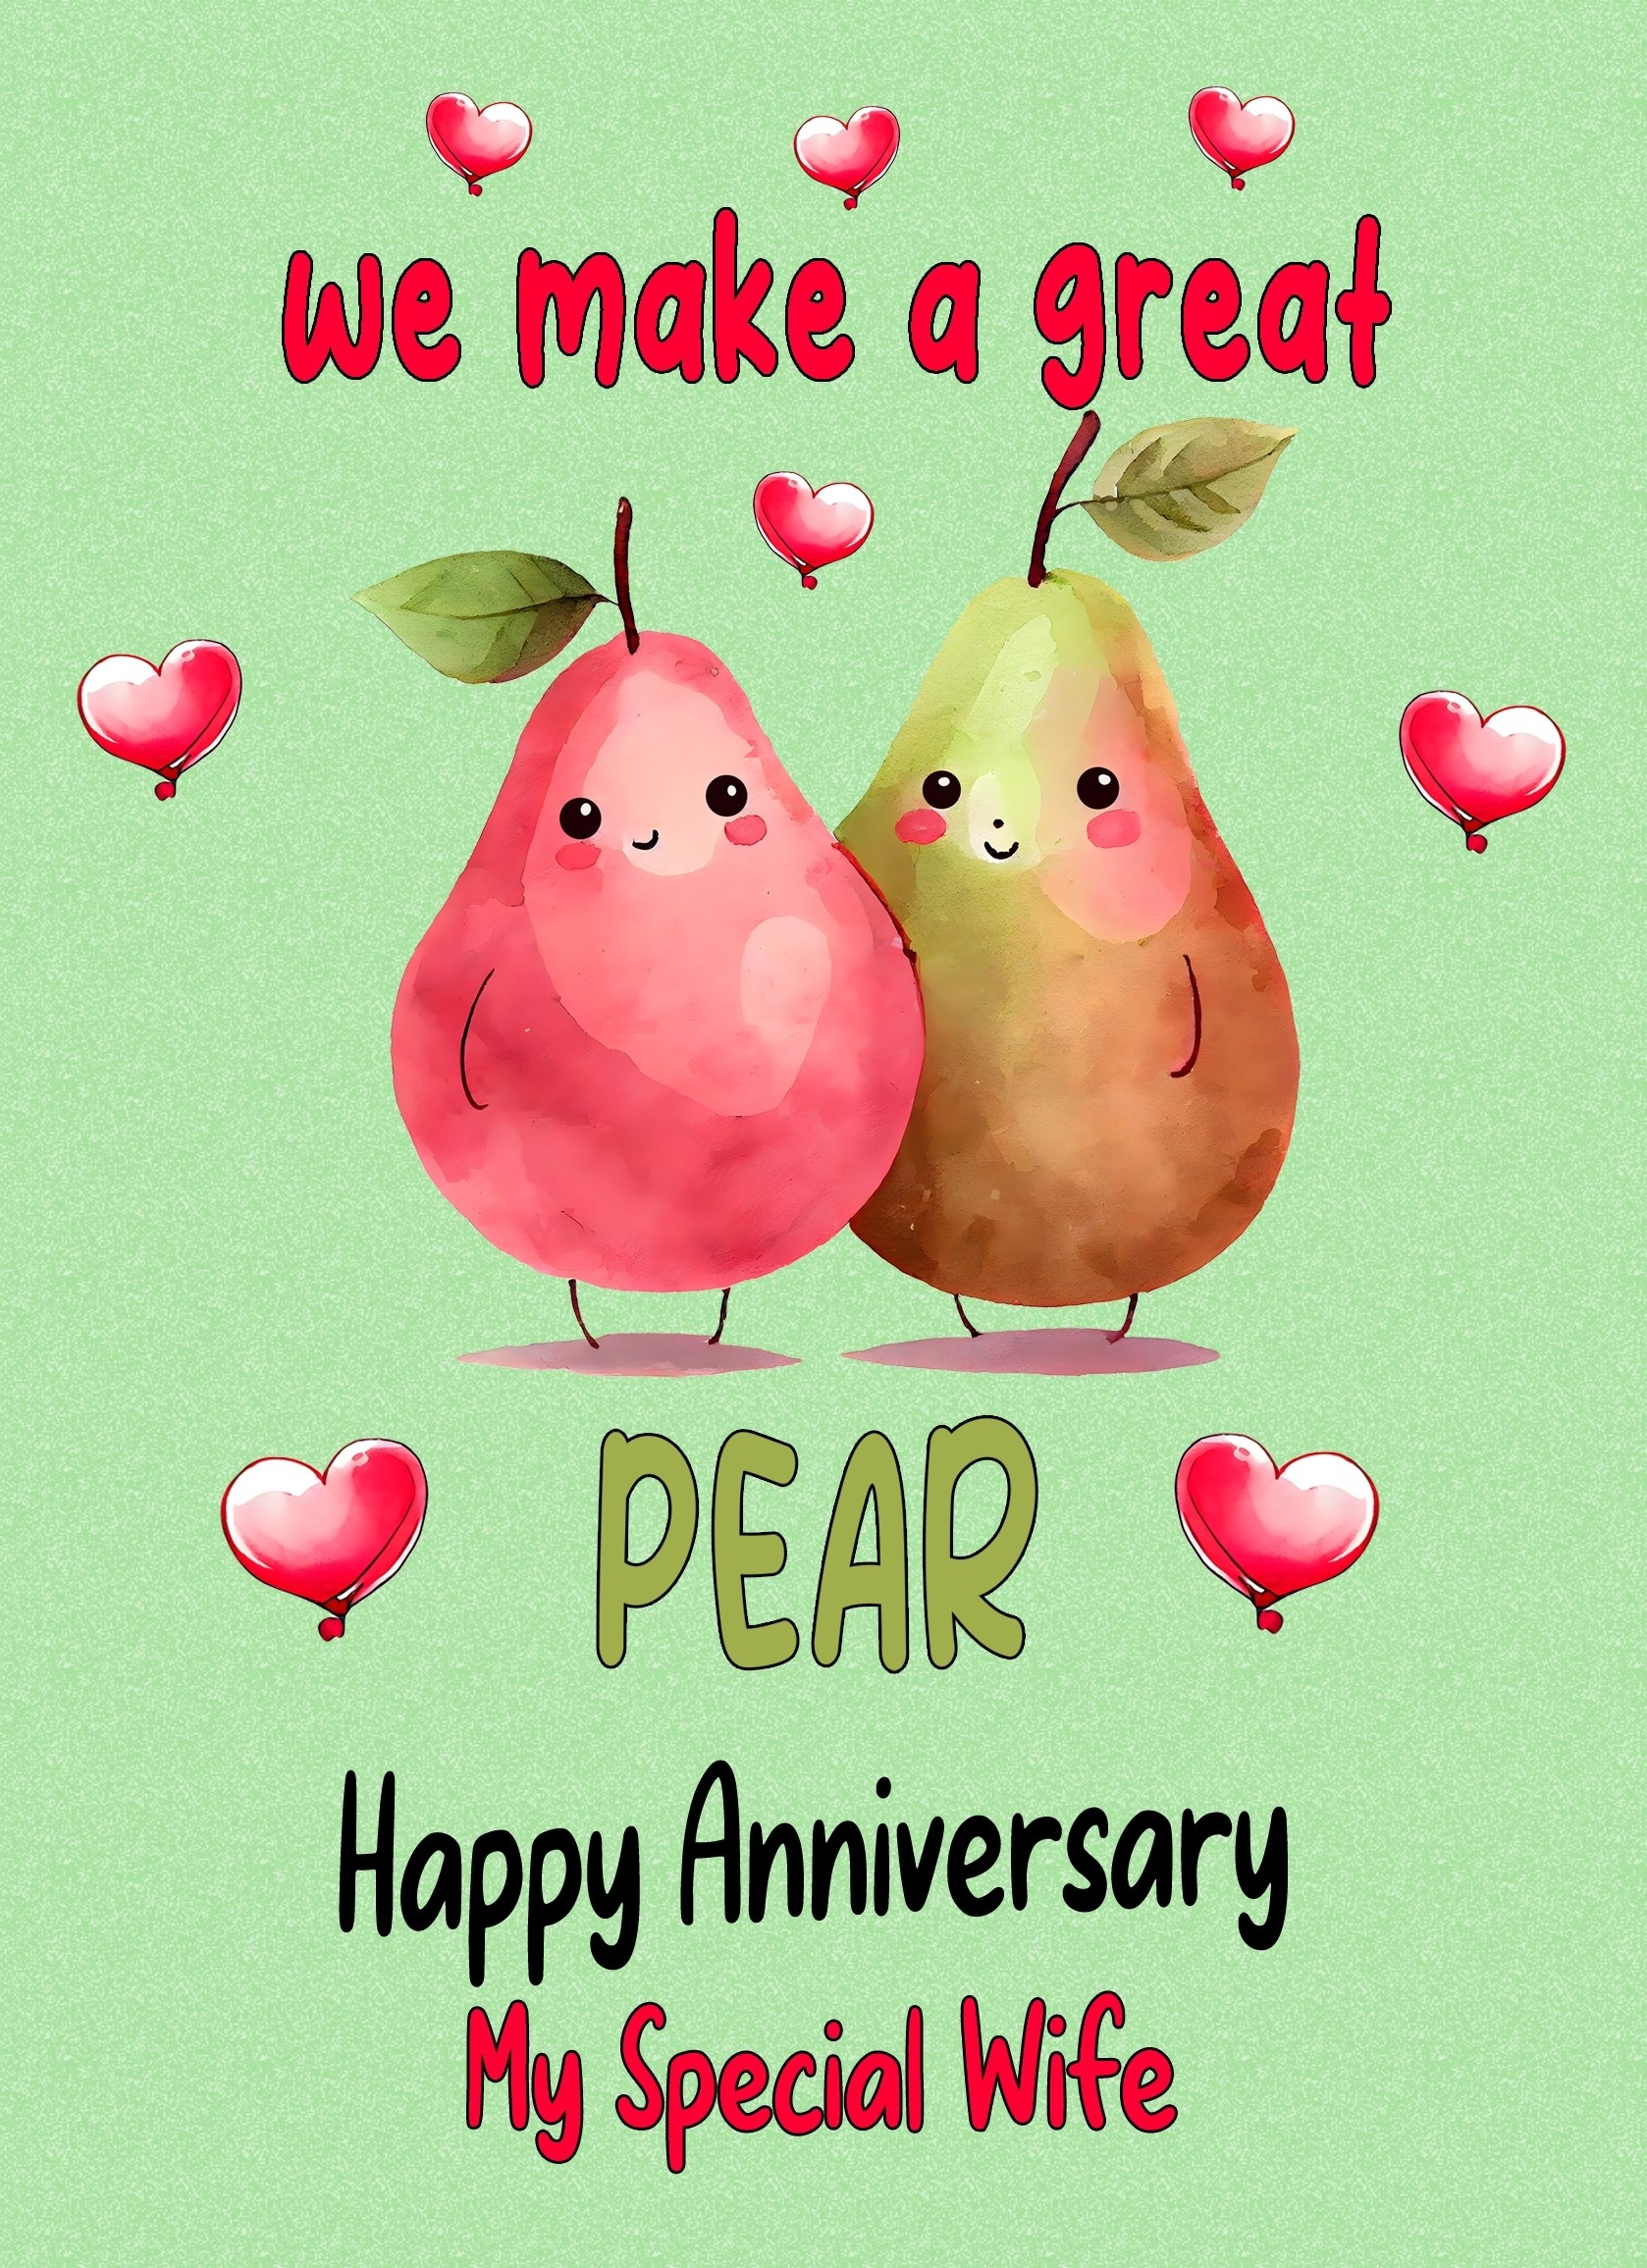 Funny Pun Romantic Anniversary Card for Wife (Great Pear)